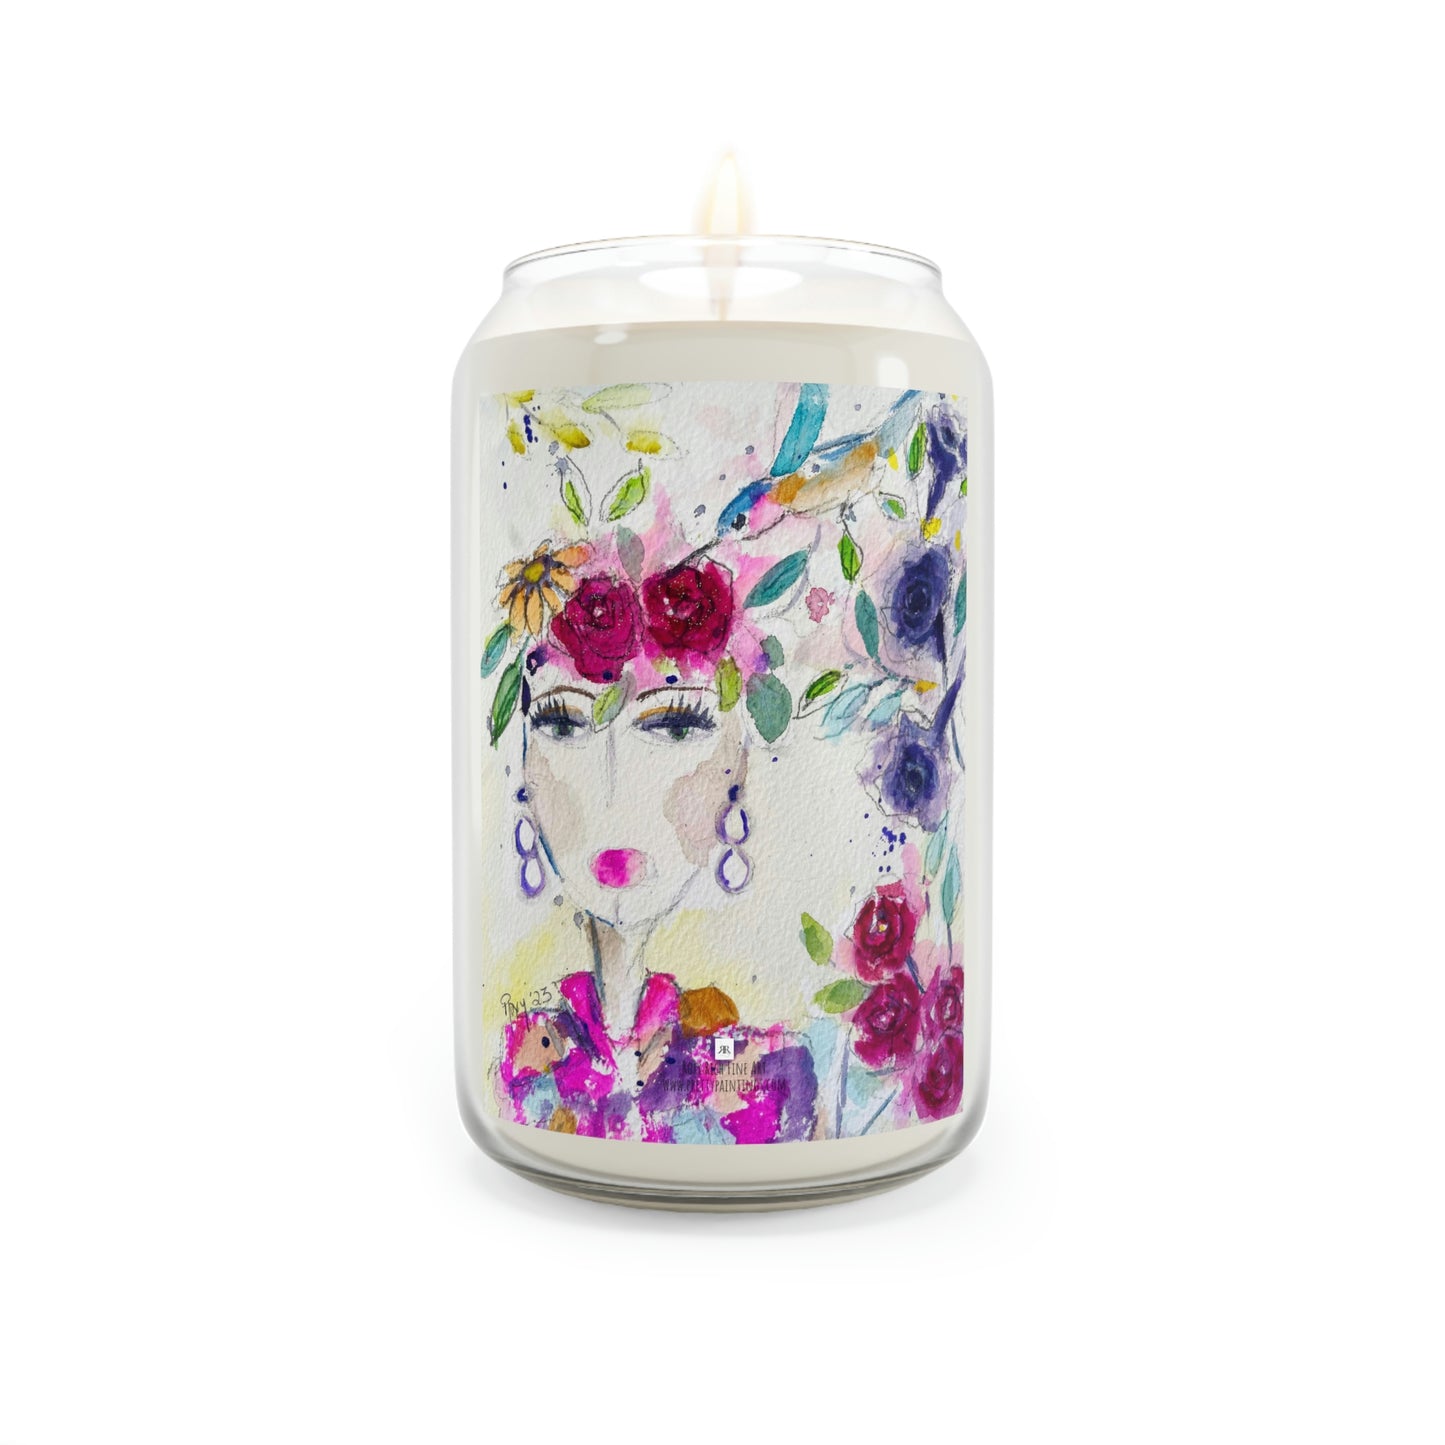 Haute Couture Hummingbird Scented Candle, 13.75oz